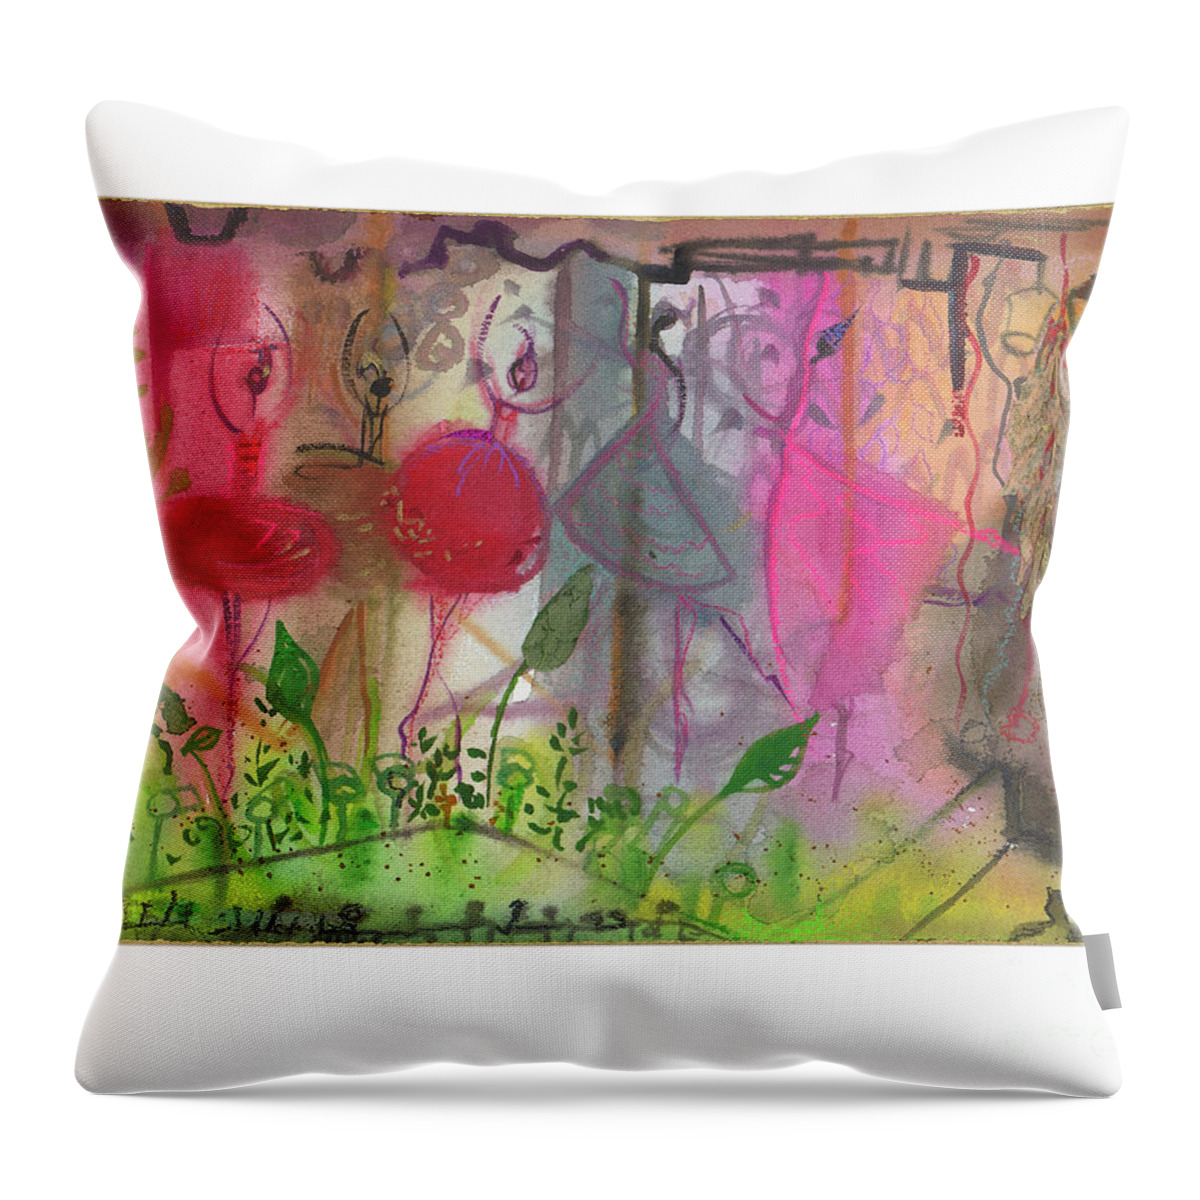 Ballet Throw Pillow featuring the painting The Ballet by Cherie Salerno